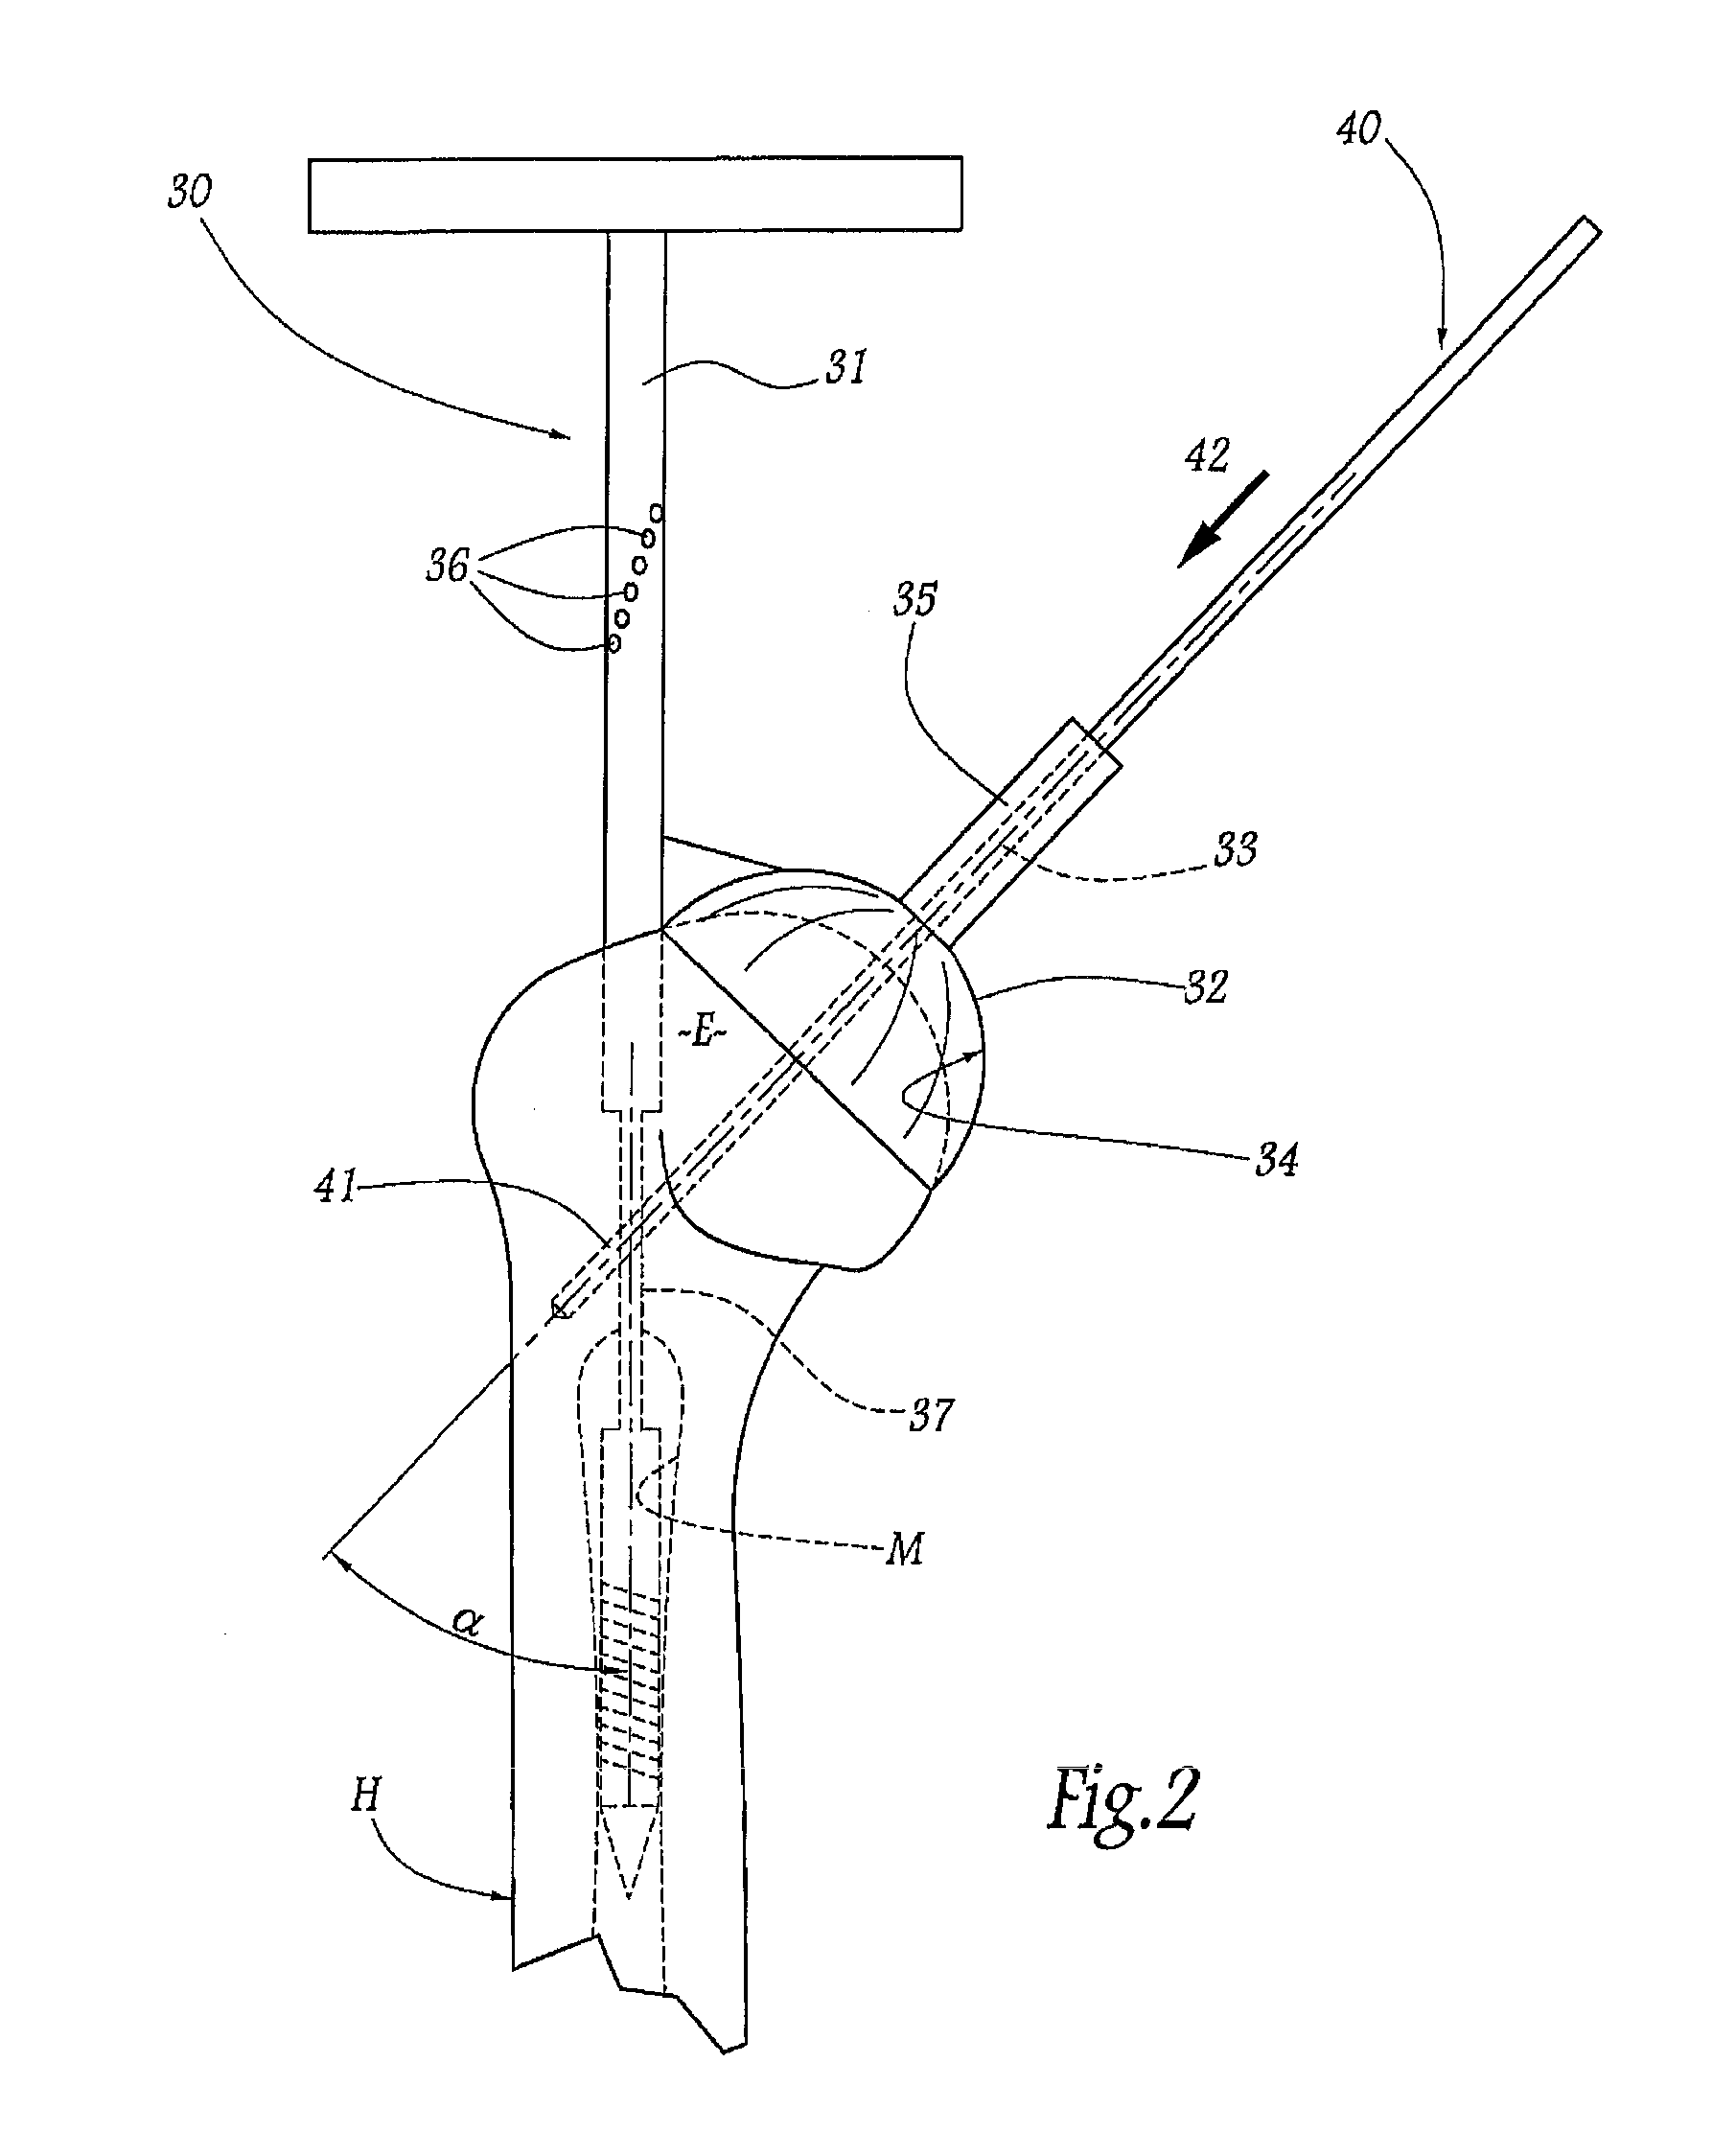 Apparatus for fitting a shoulder prosthesis